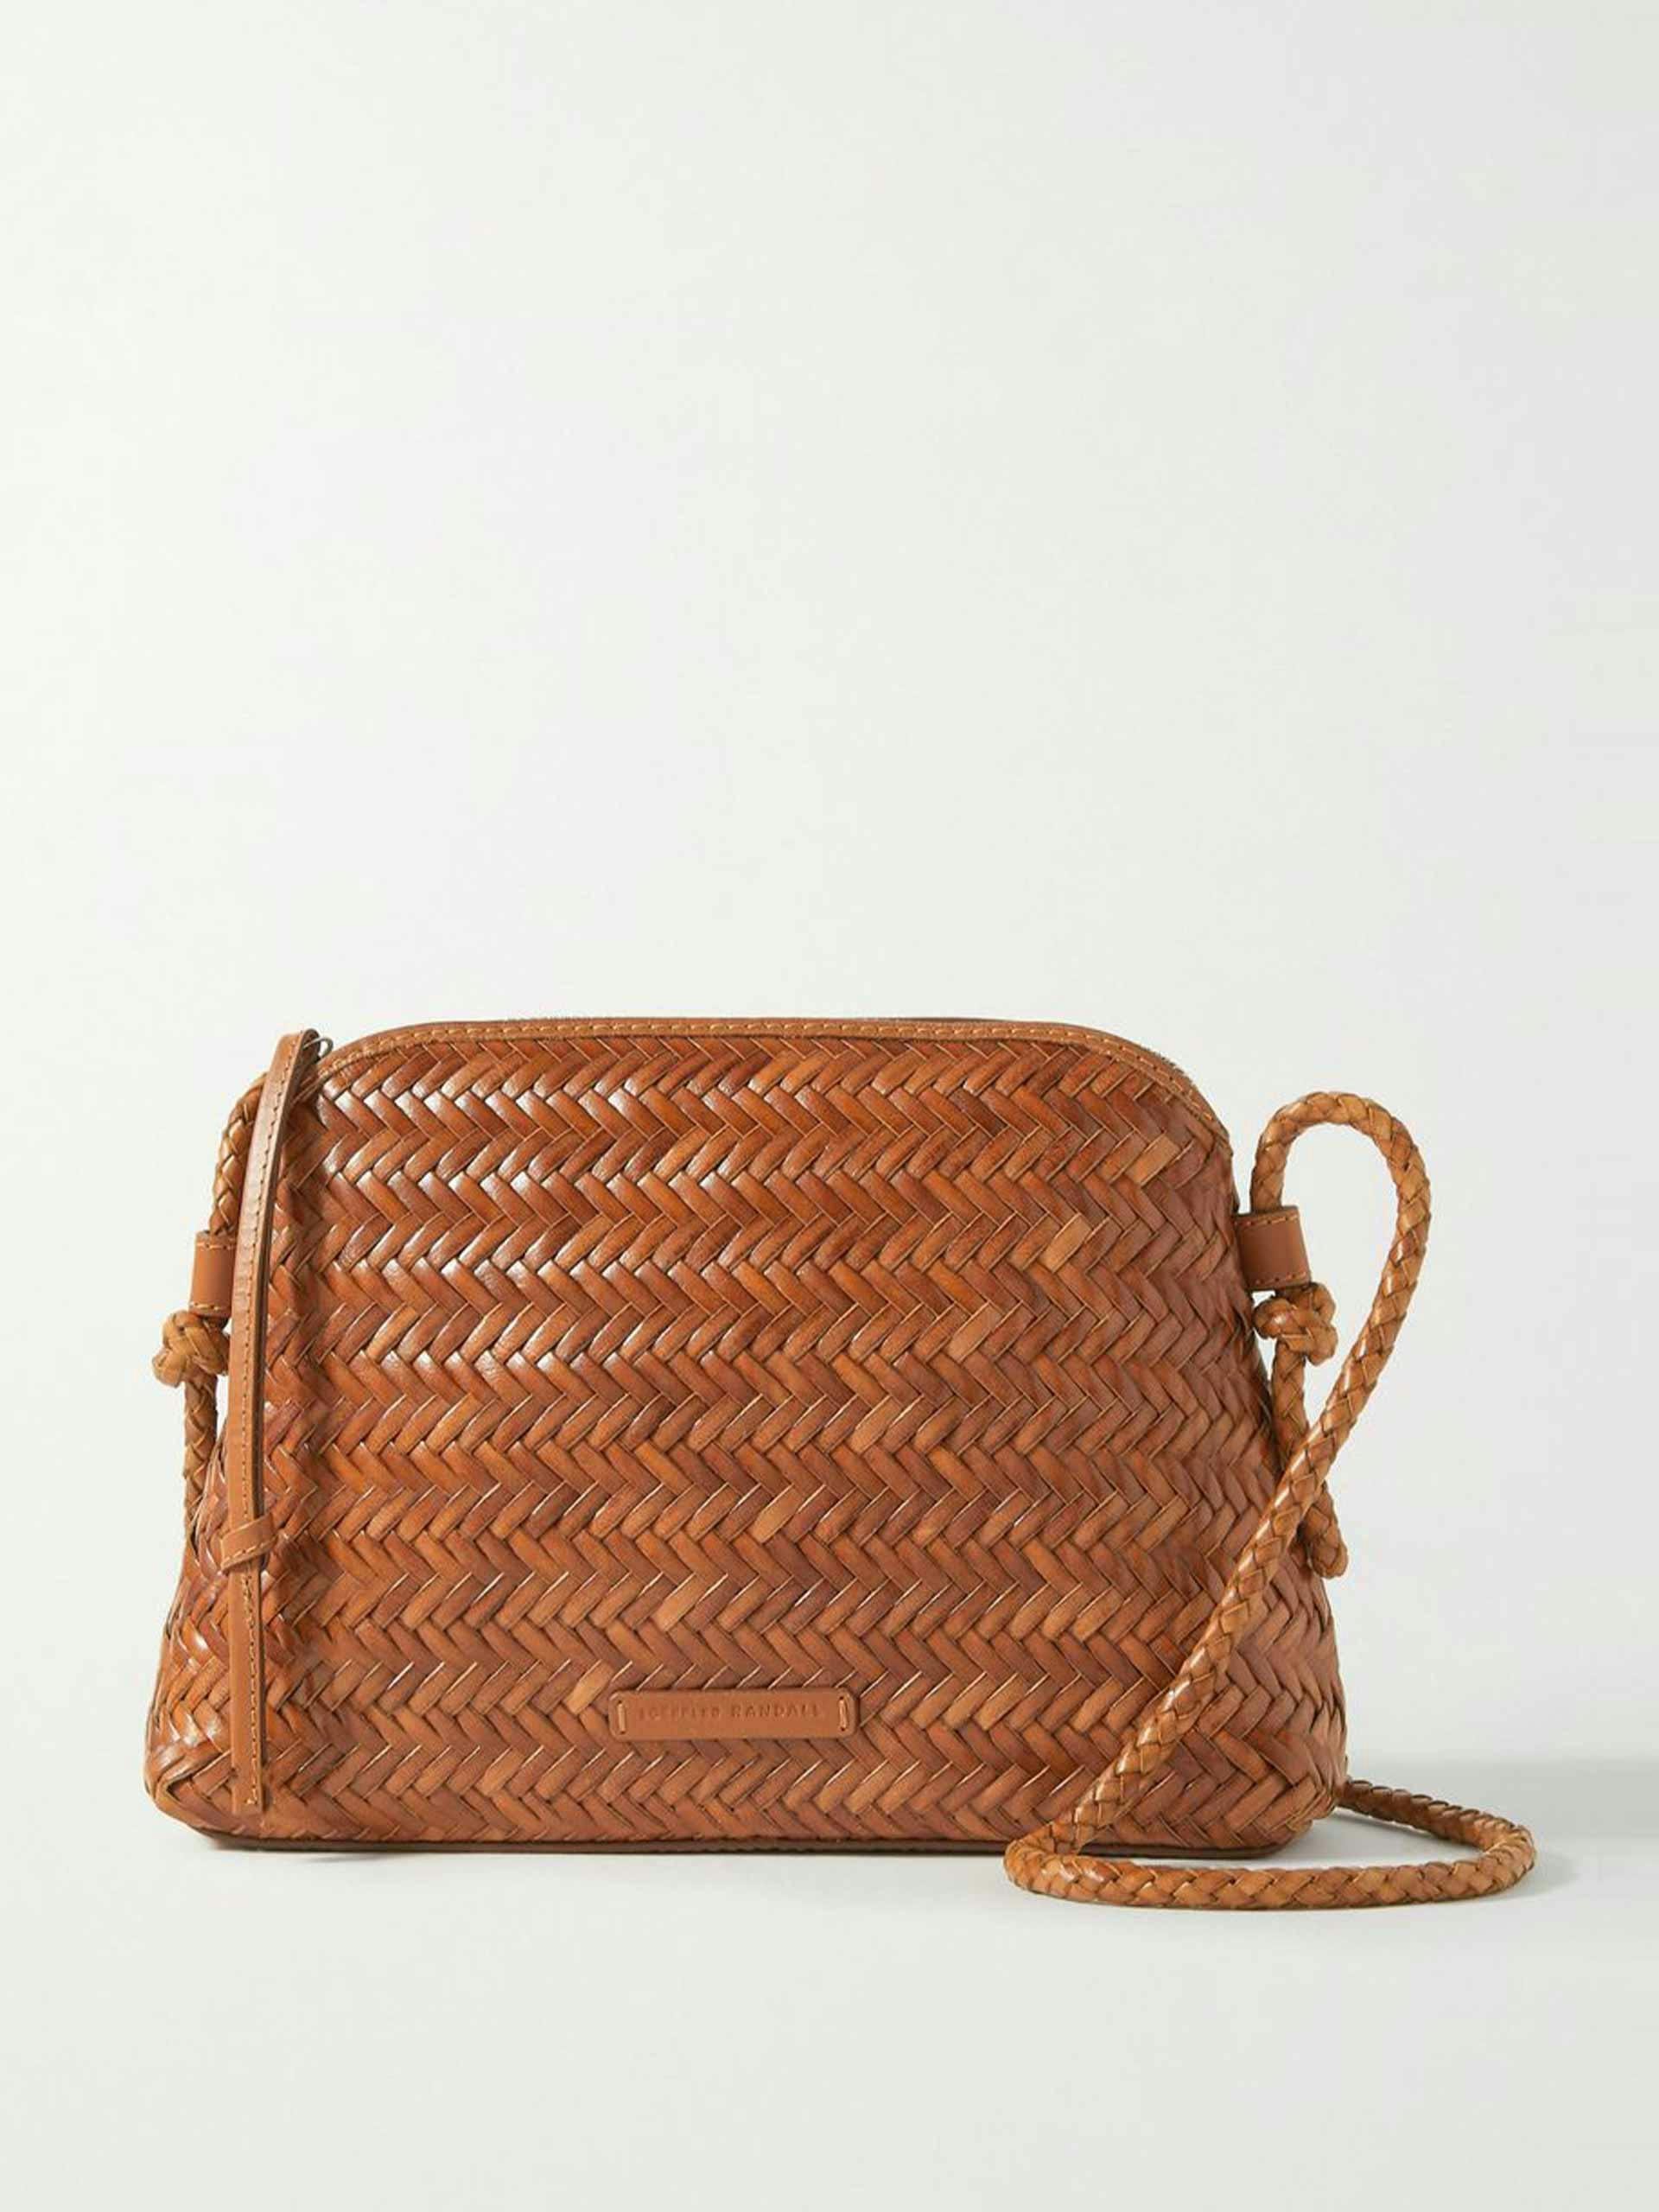 Mallory woven leather shoulder bag